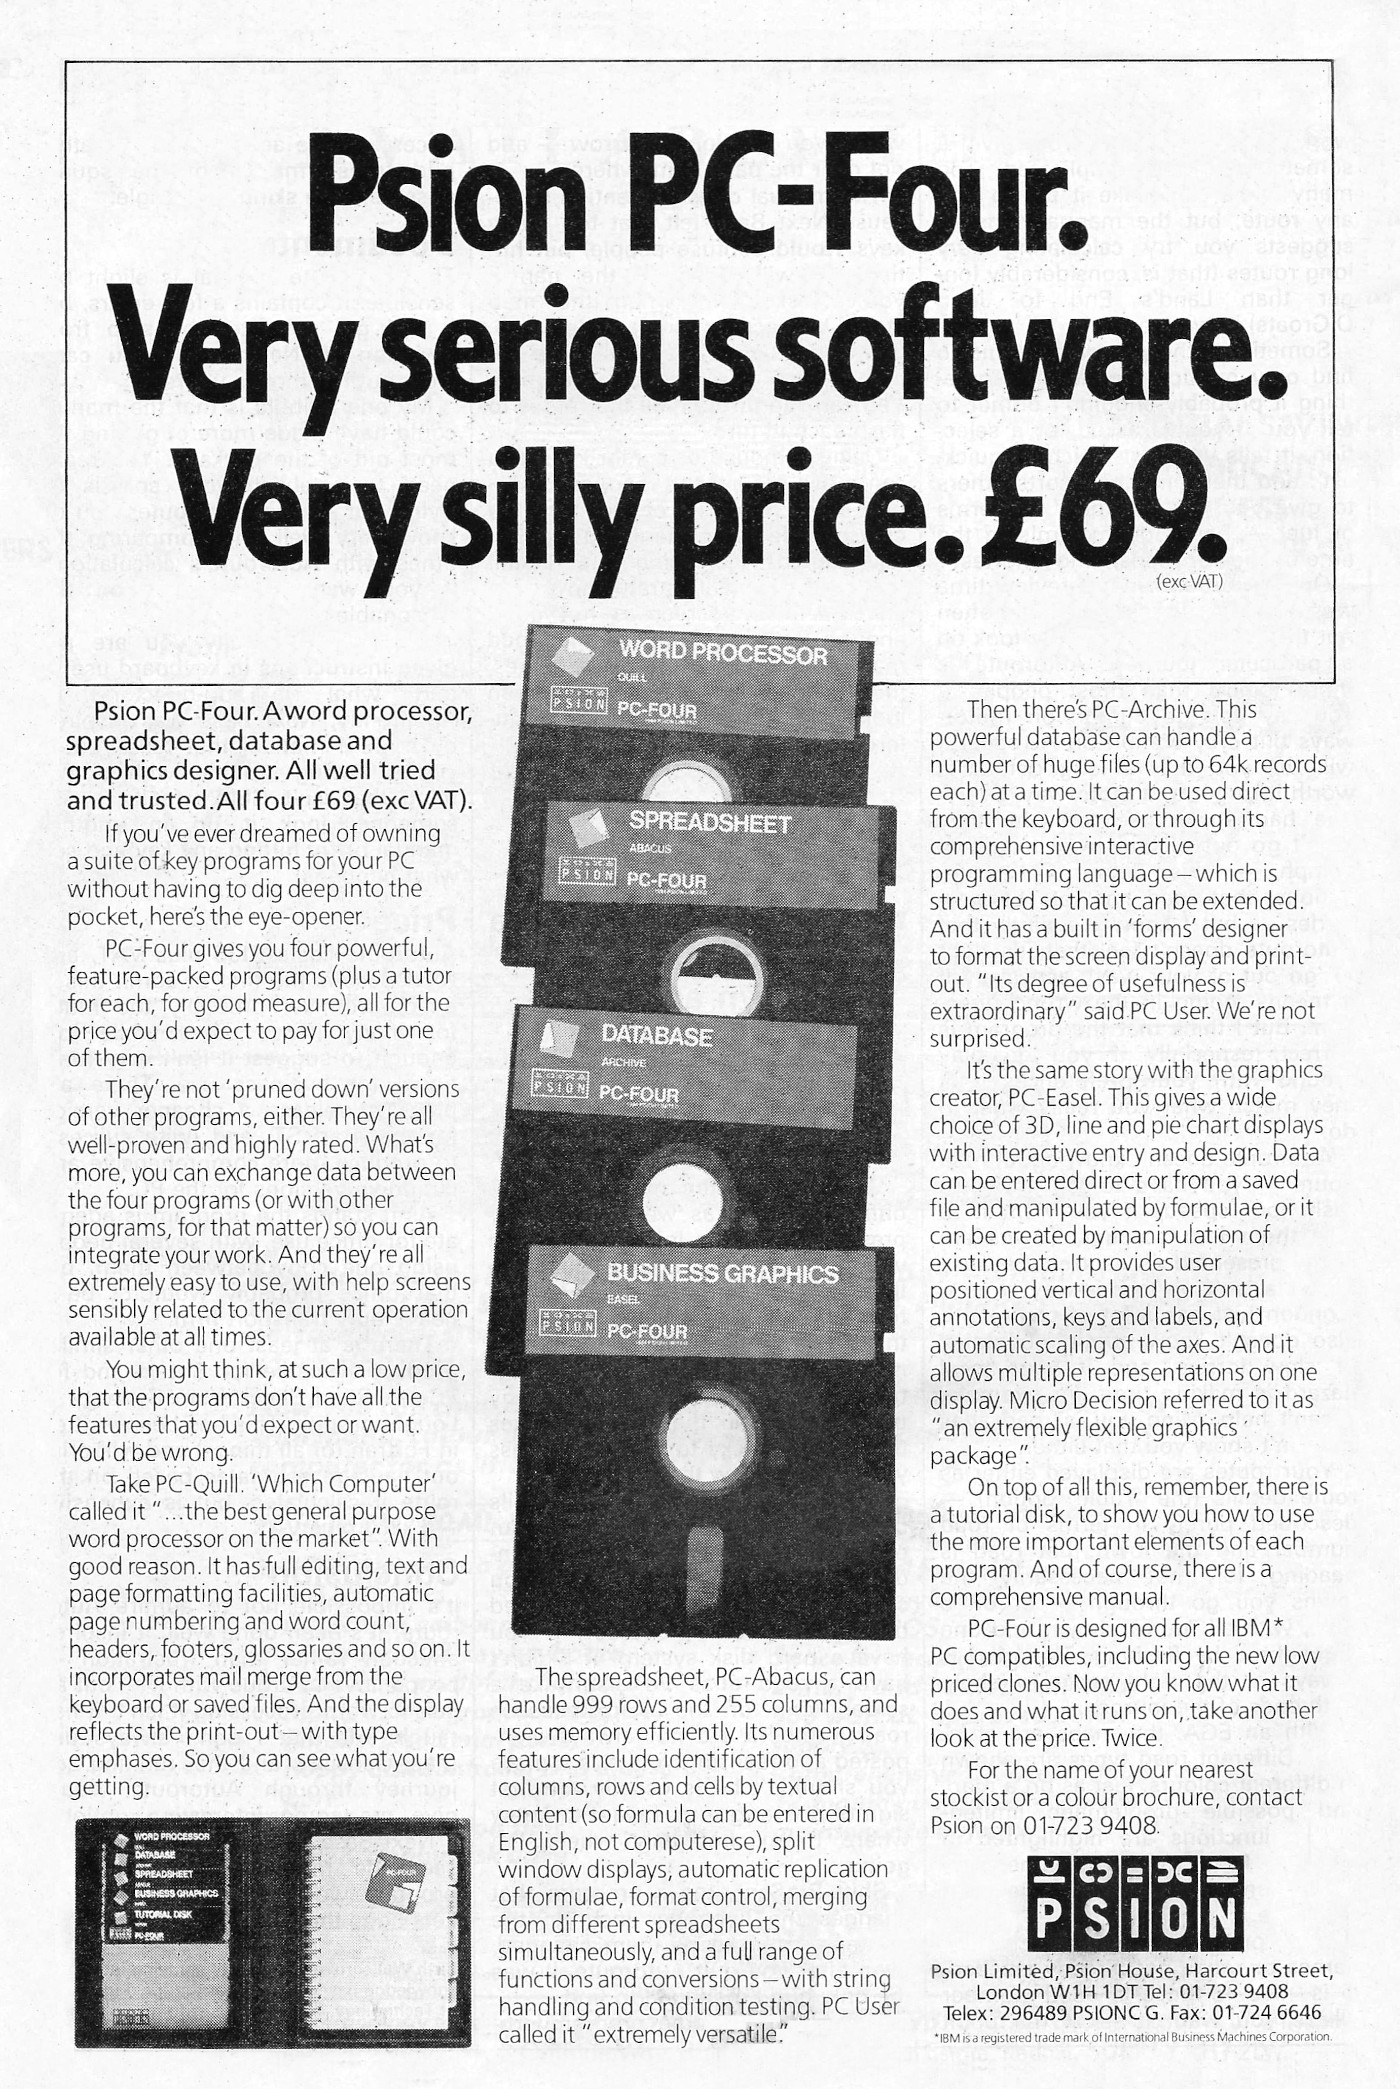 Psion's PC-4 application suite, the MS-DOS-compatible consumer version of the software that ended up on the QL and One-Per-Desk. From Personal Computer World, June 1988